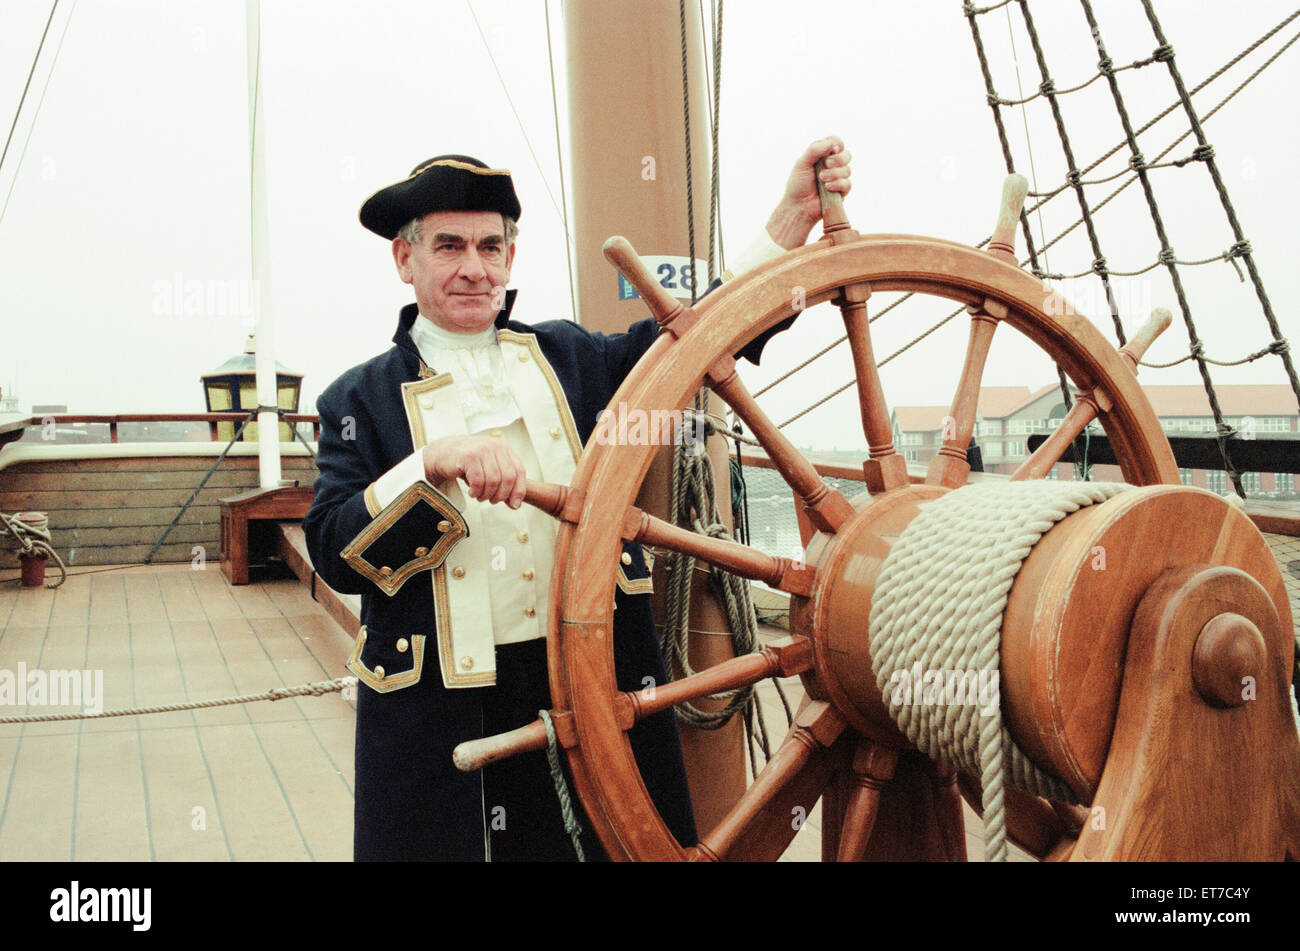 Captain James Cook, aka David Wheeler, appealing for volunteers to help man the Endeavour, at Stockton Castlegate Quay, 30th January 1997. Stock Photo